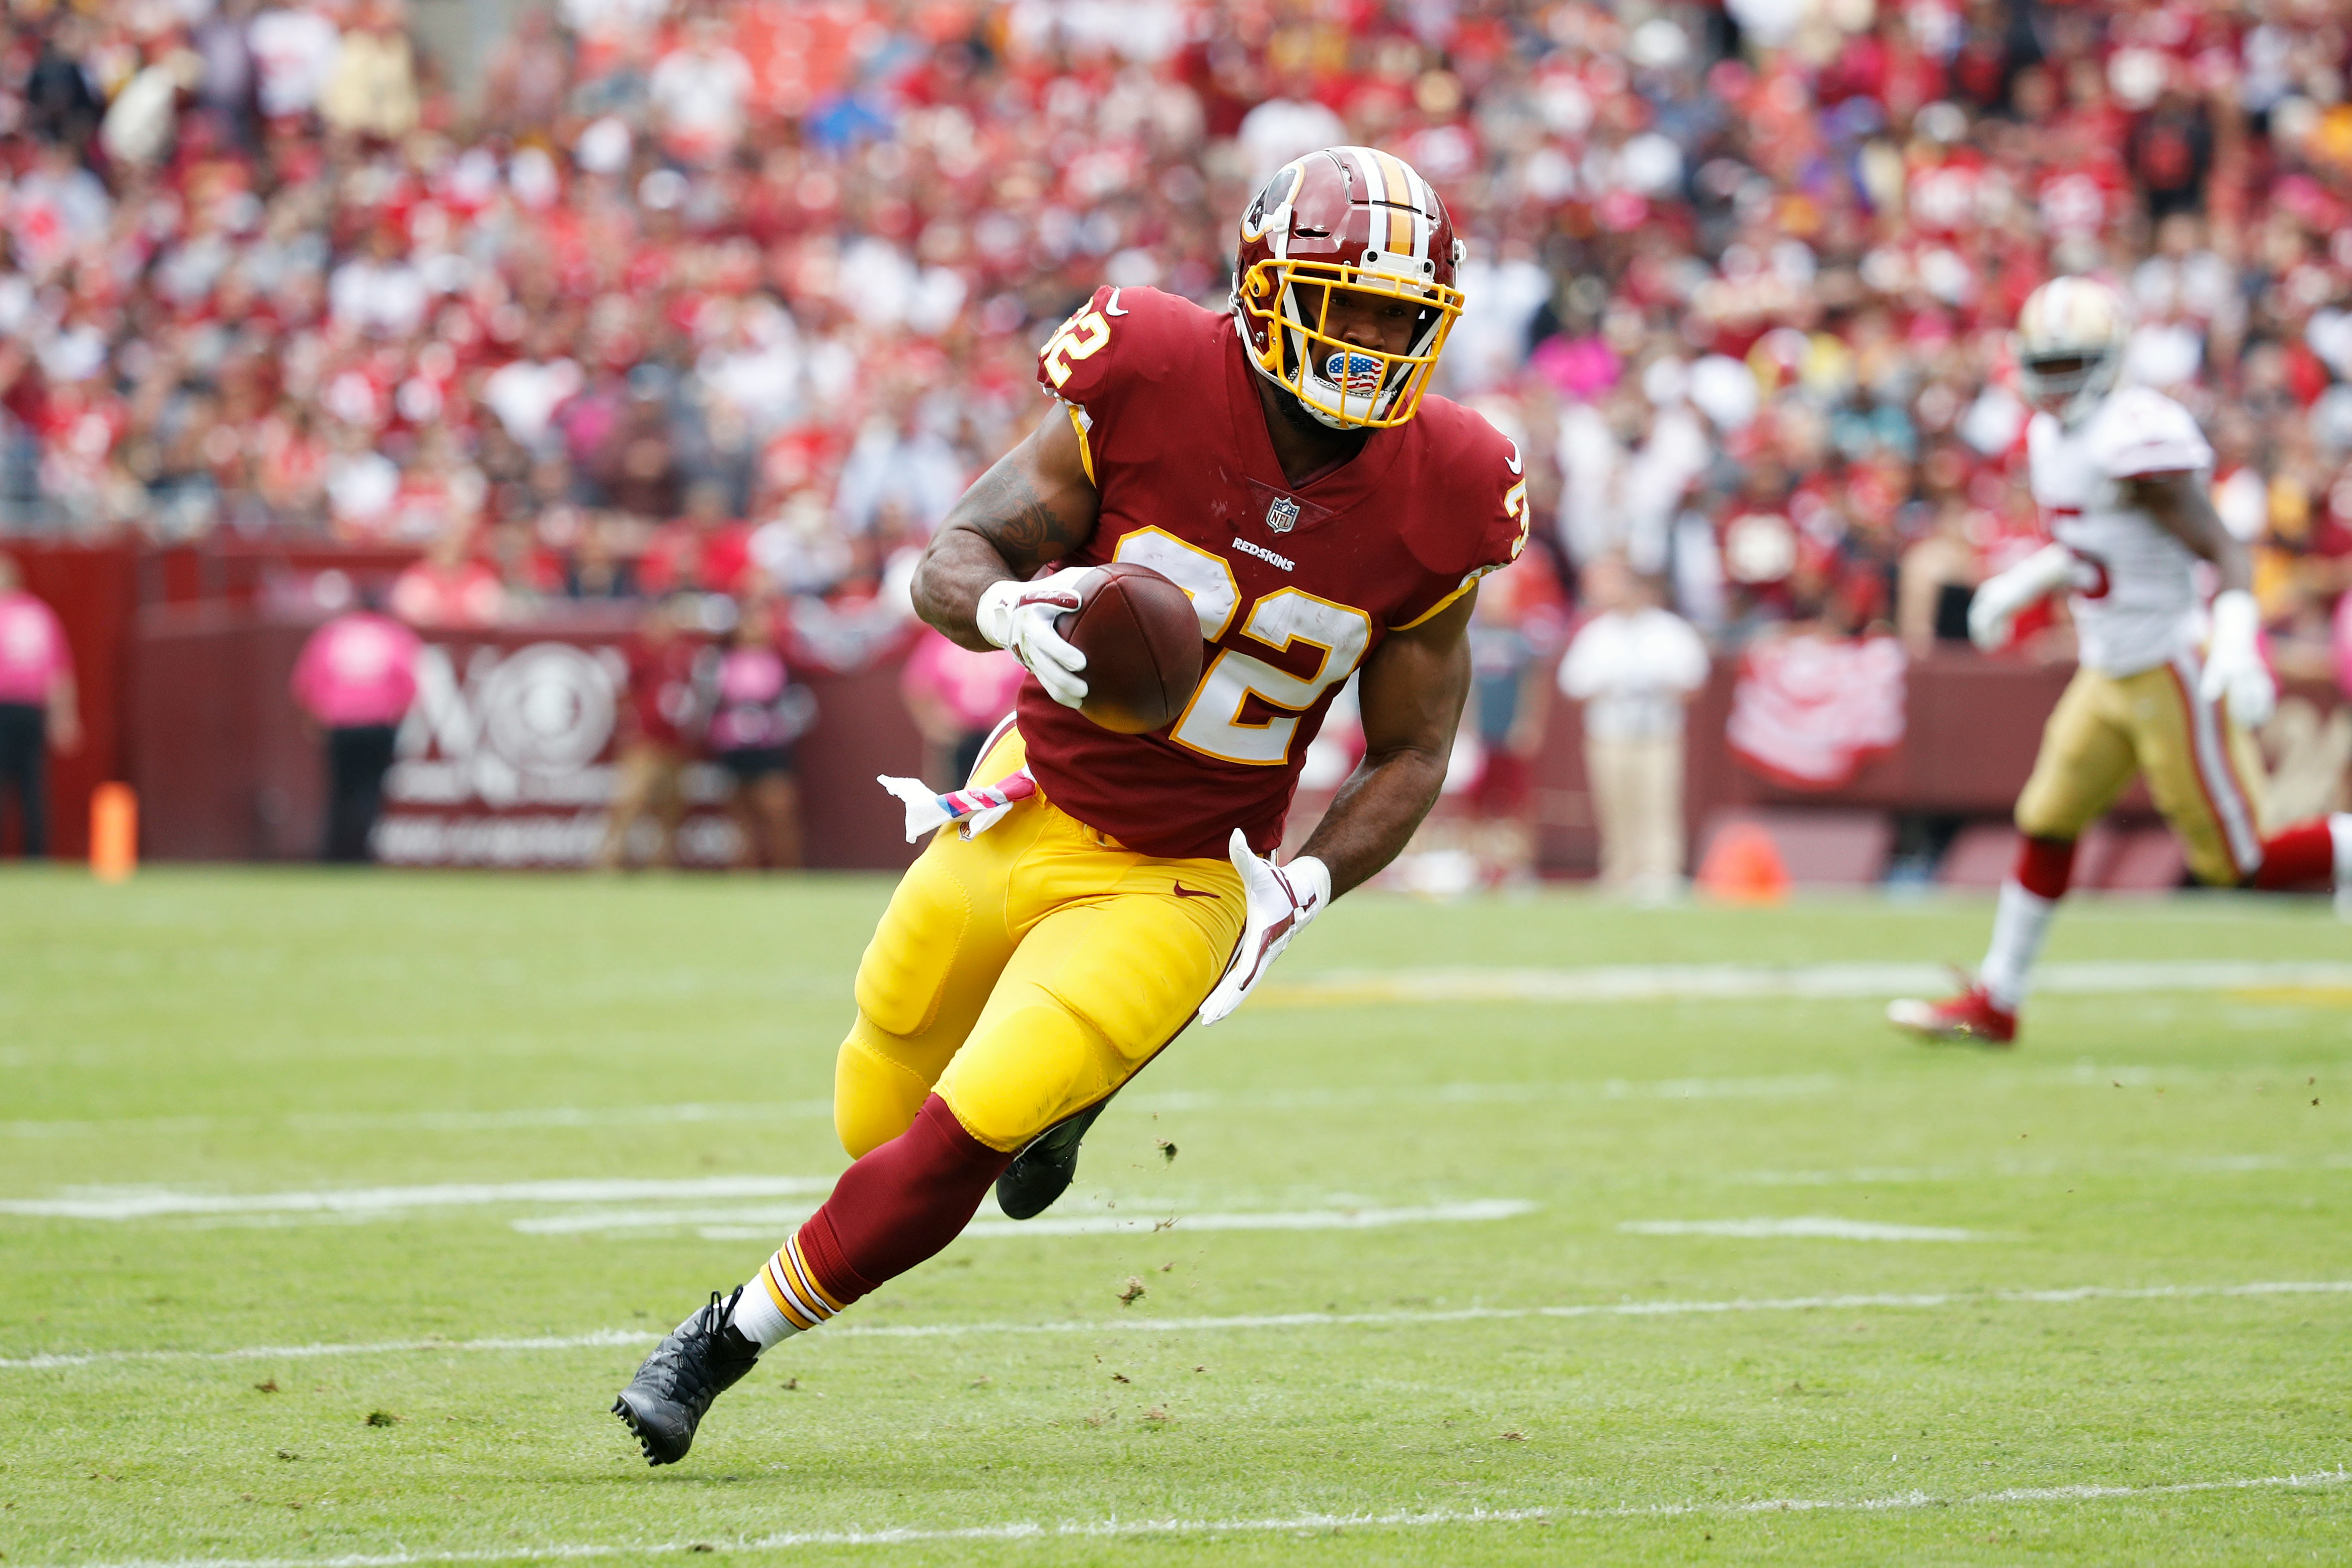 Samaje Perine Will be the Redskins Starting RB: Fantasy or Reality